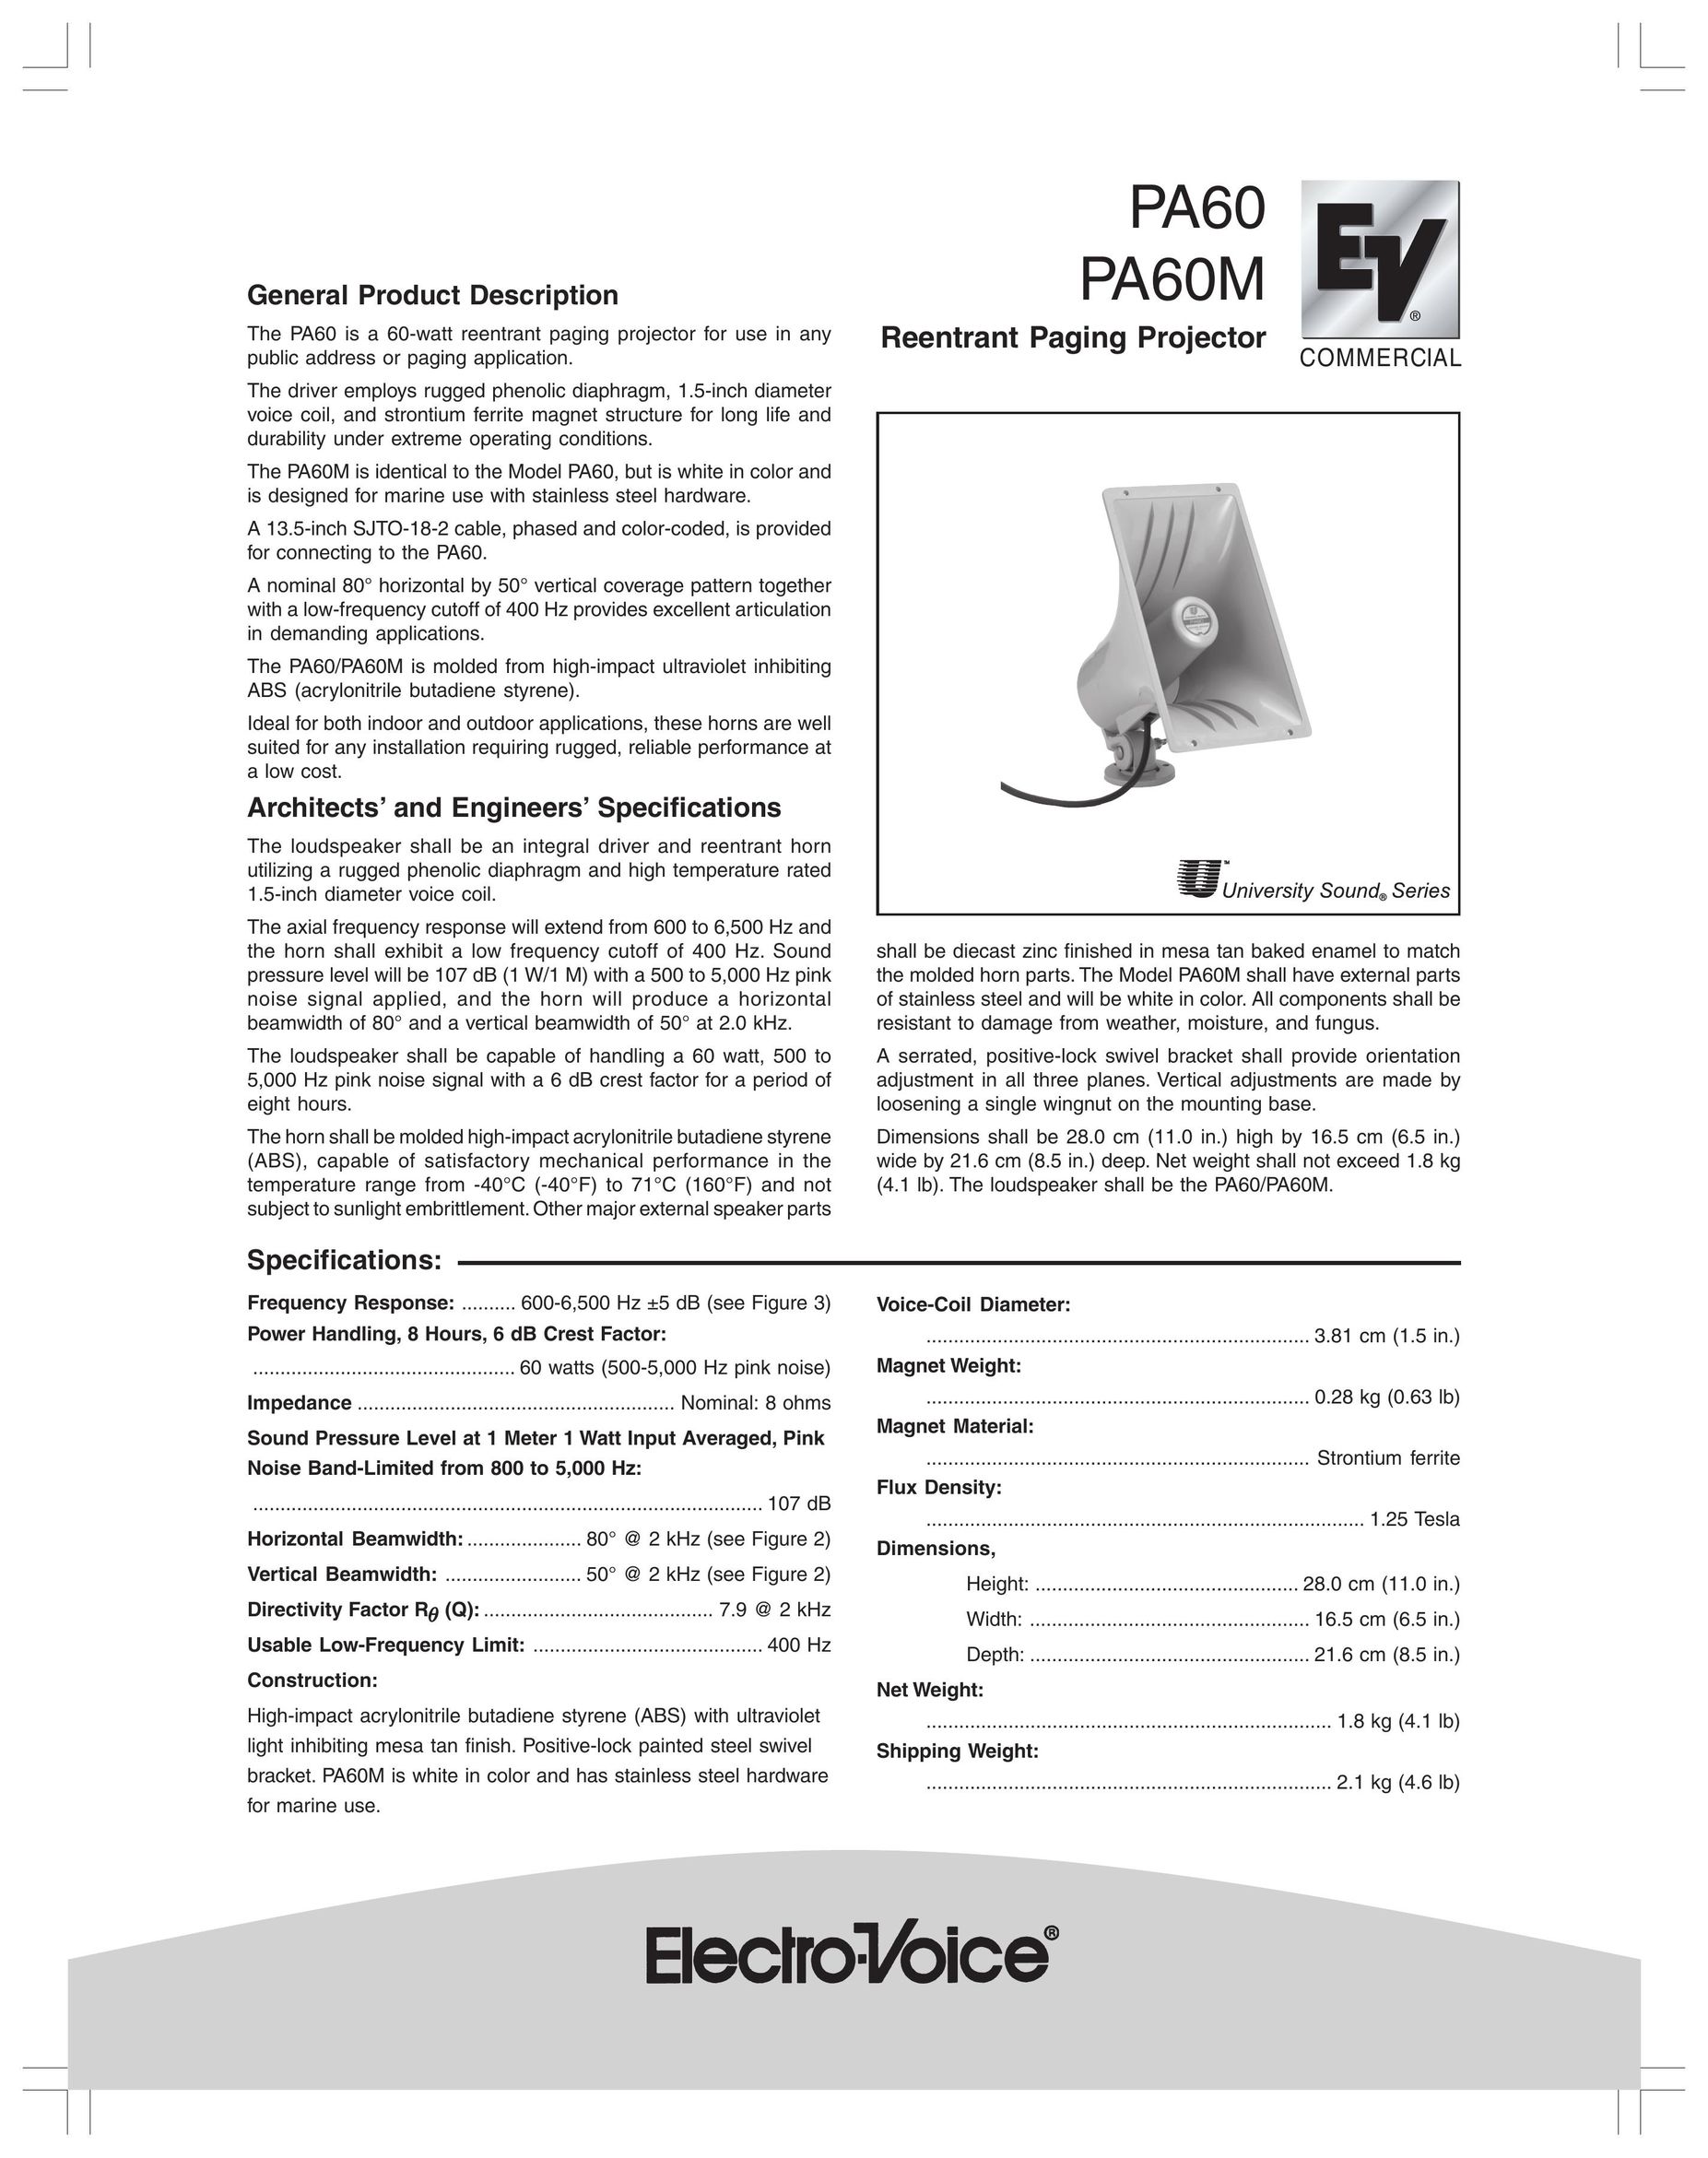 Electro-Voice PA60 Projector User Manual